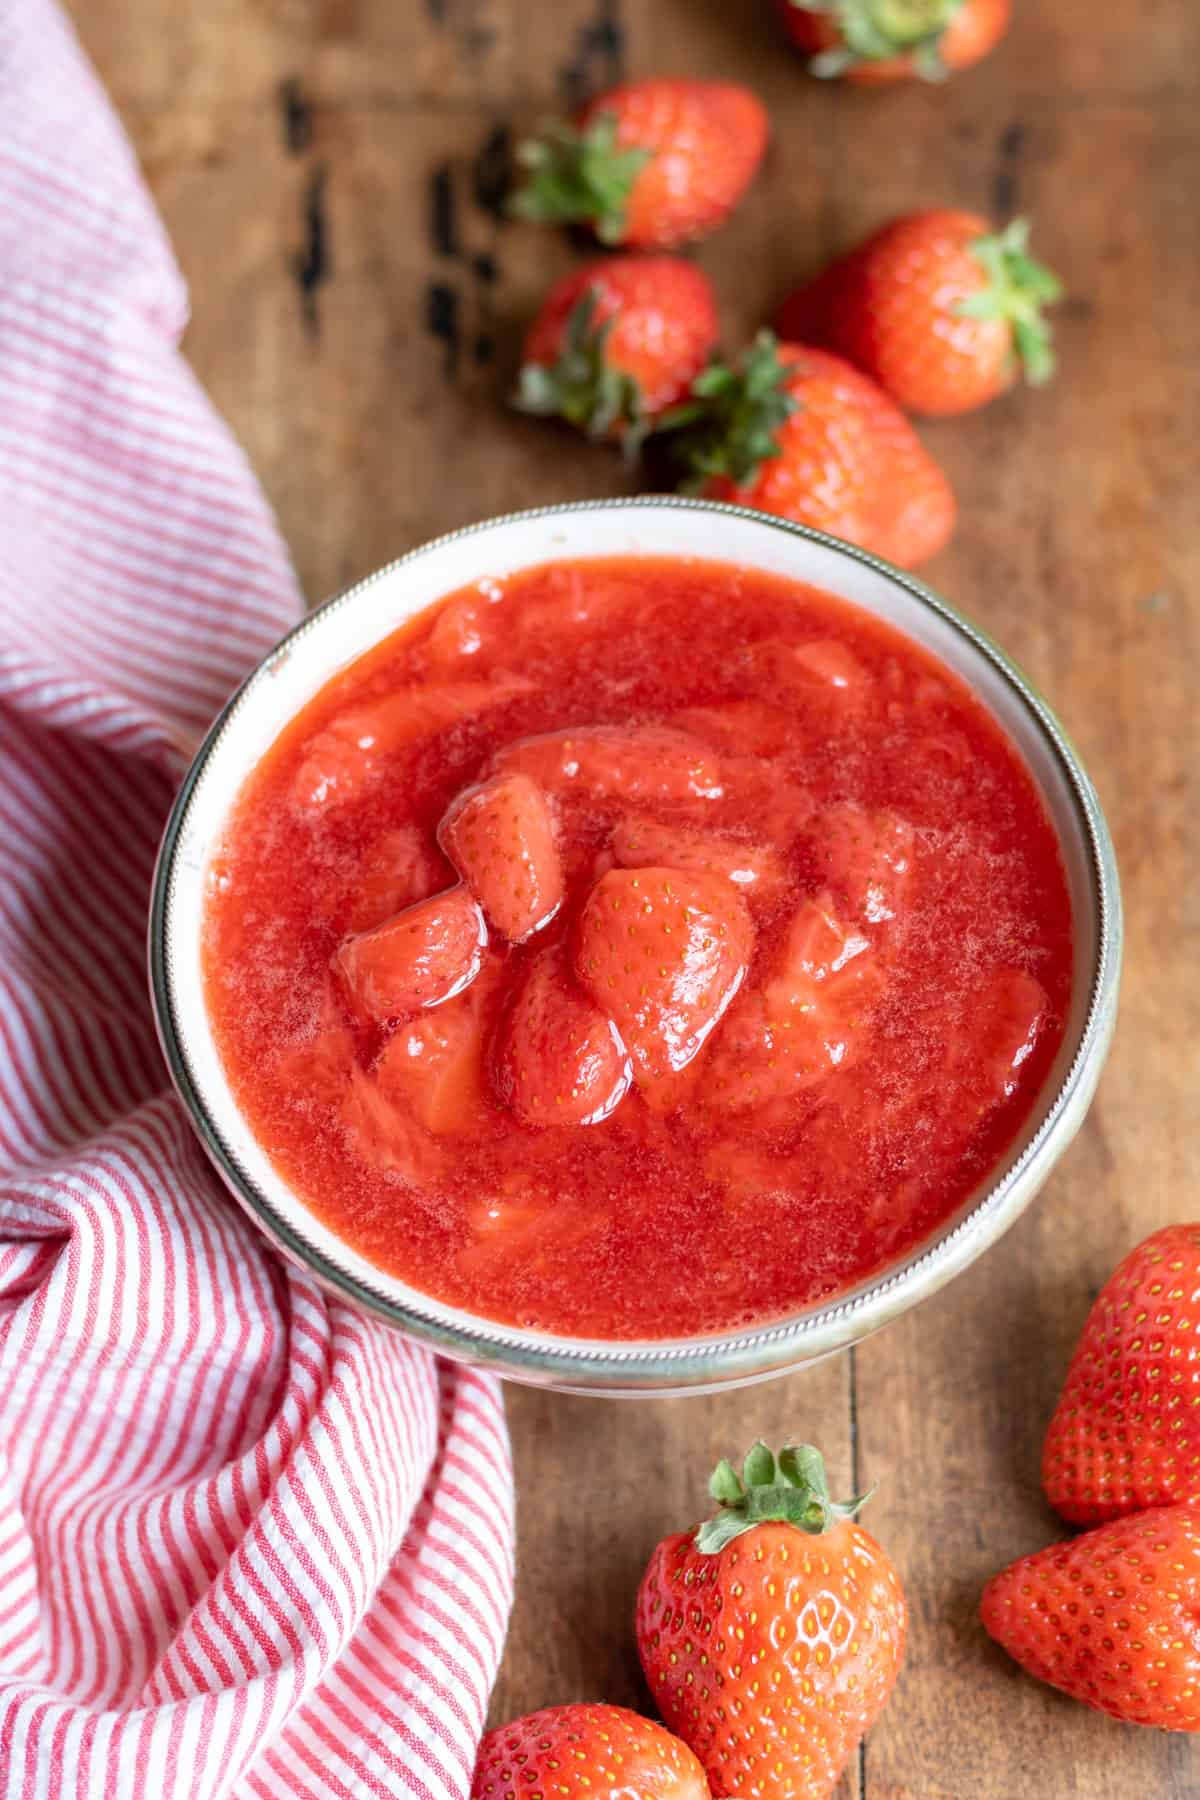 Dish of strawberry compote.